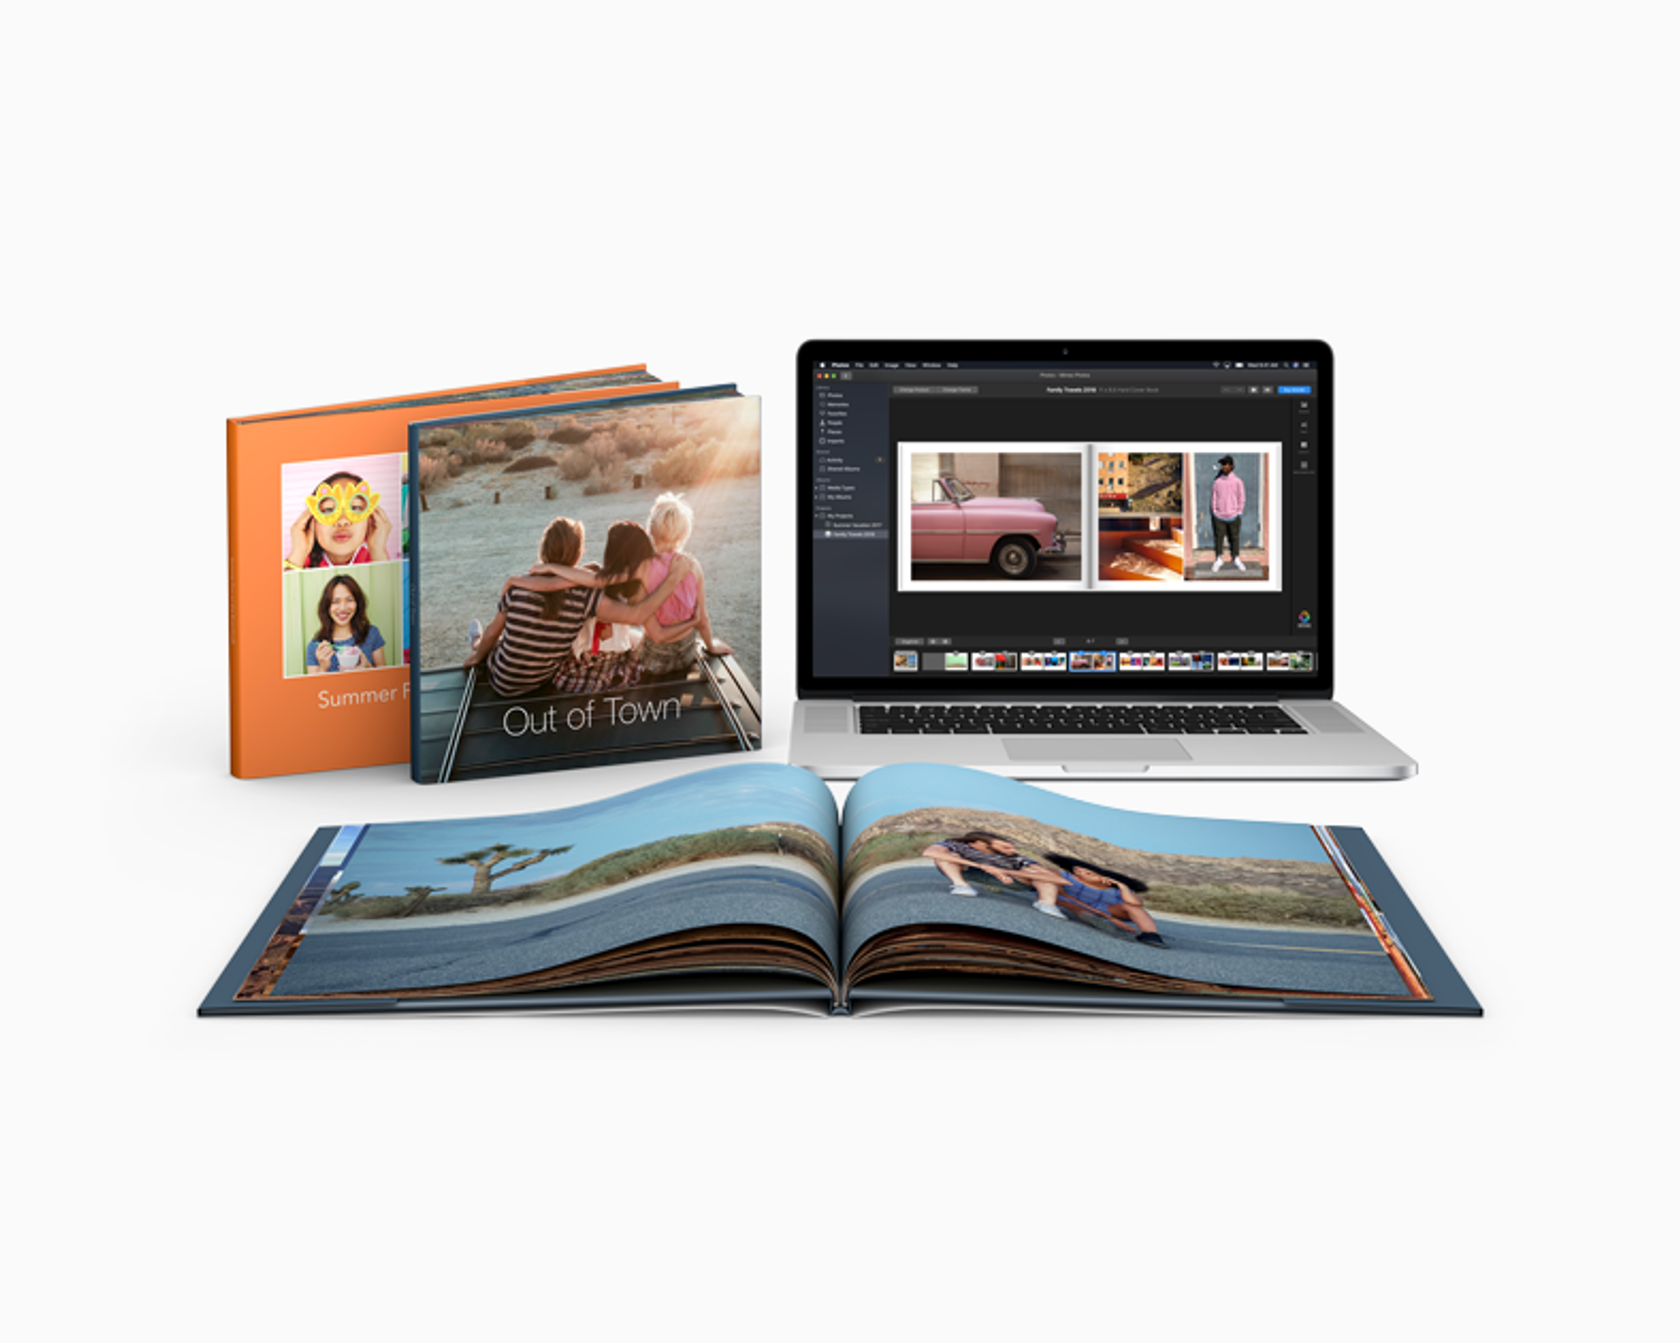 How to Create a Custom Coffee Table Book With Unique Content and Style —  Mixbook Inspiration